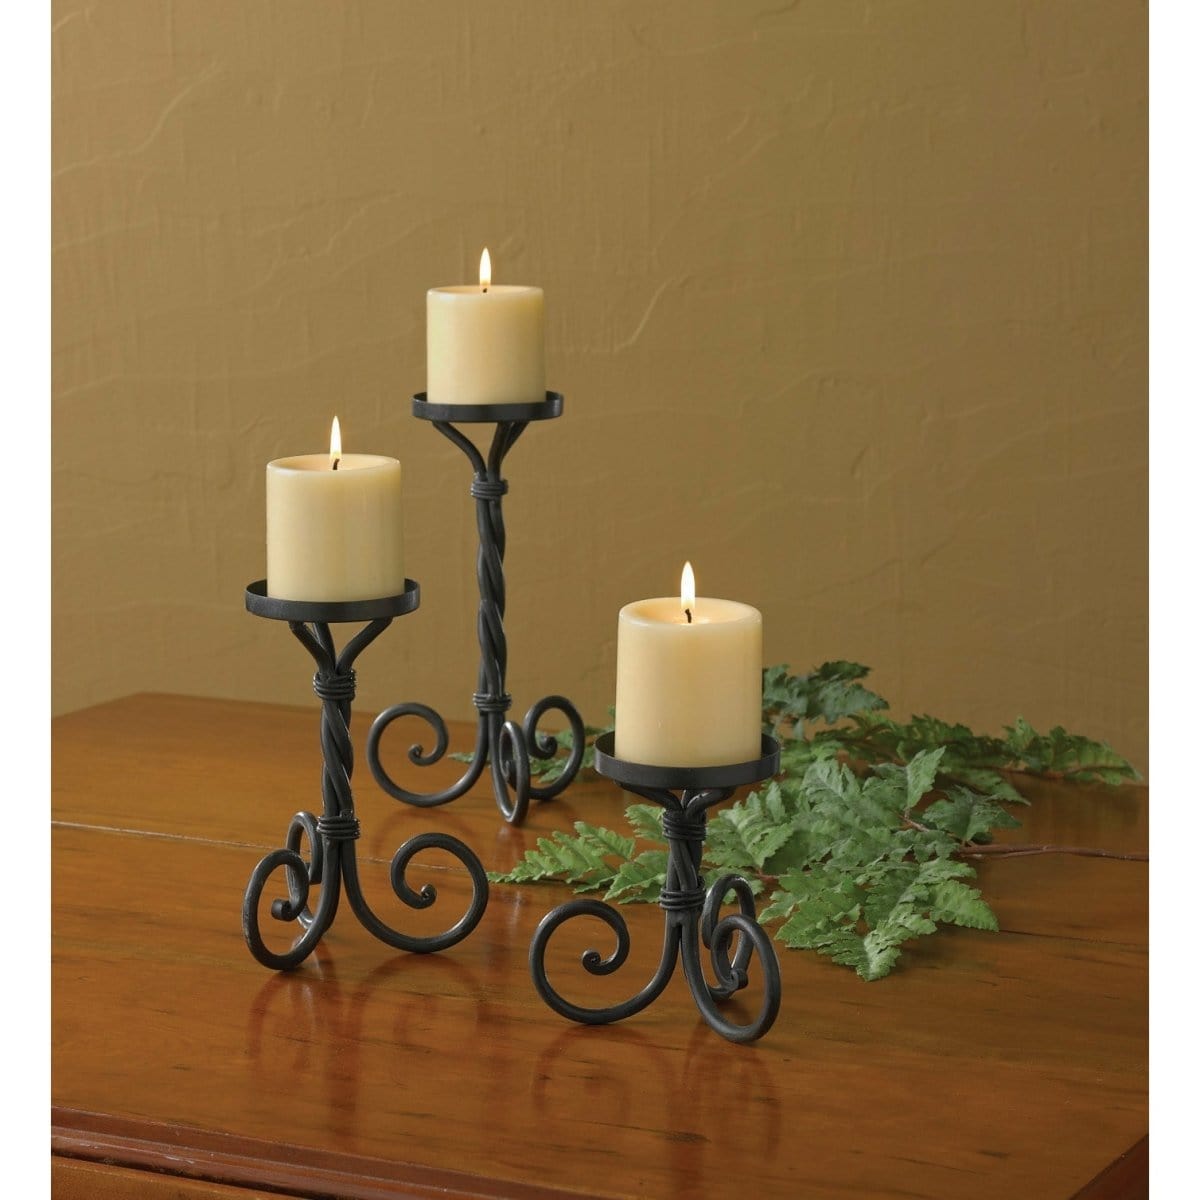 Forged Iron Scroll Pedestal Candle Holder For Pillar Candles Set of 3-Park Designs-The Village Merchant